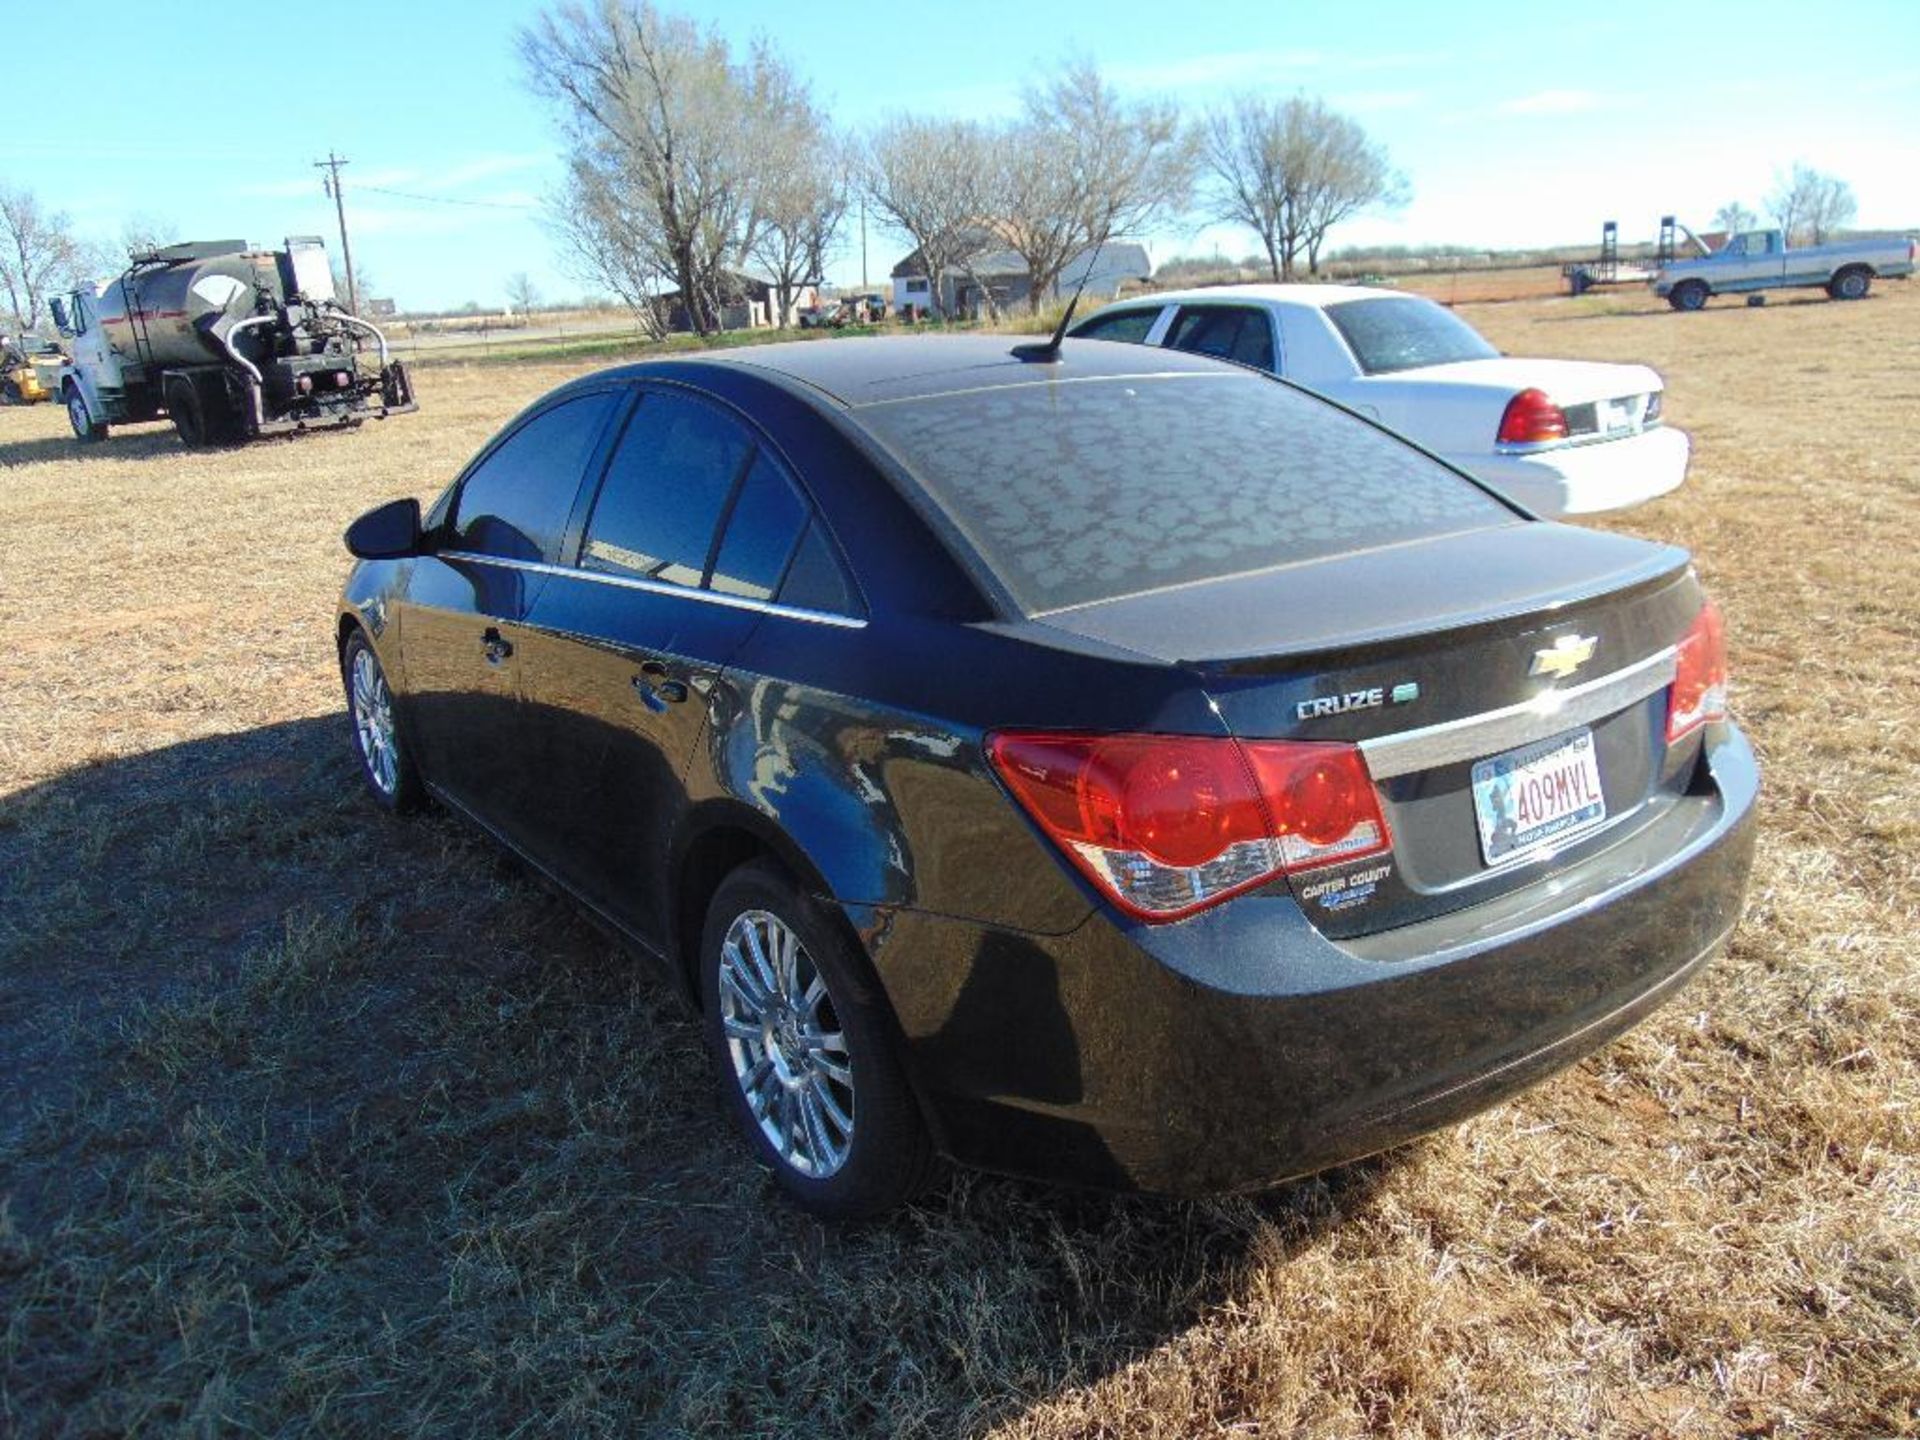 2011 Chevy Cruze s/n 1g1pj5s96b7290011, 4 cylinder, auto trans, od reads 97895 miles, - Image 7 of 10